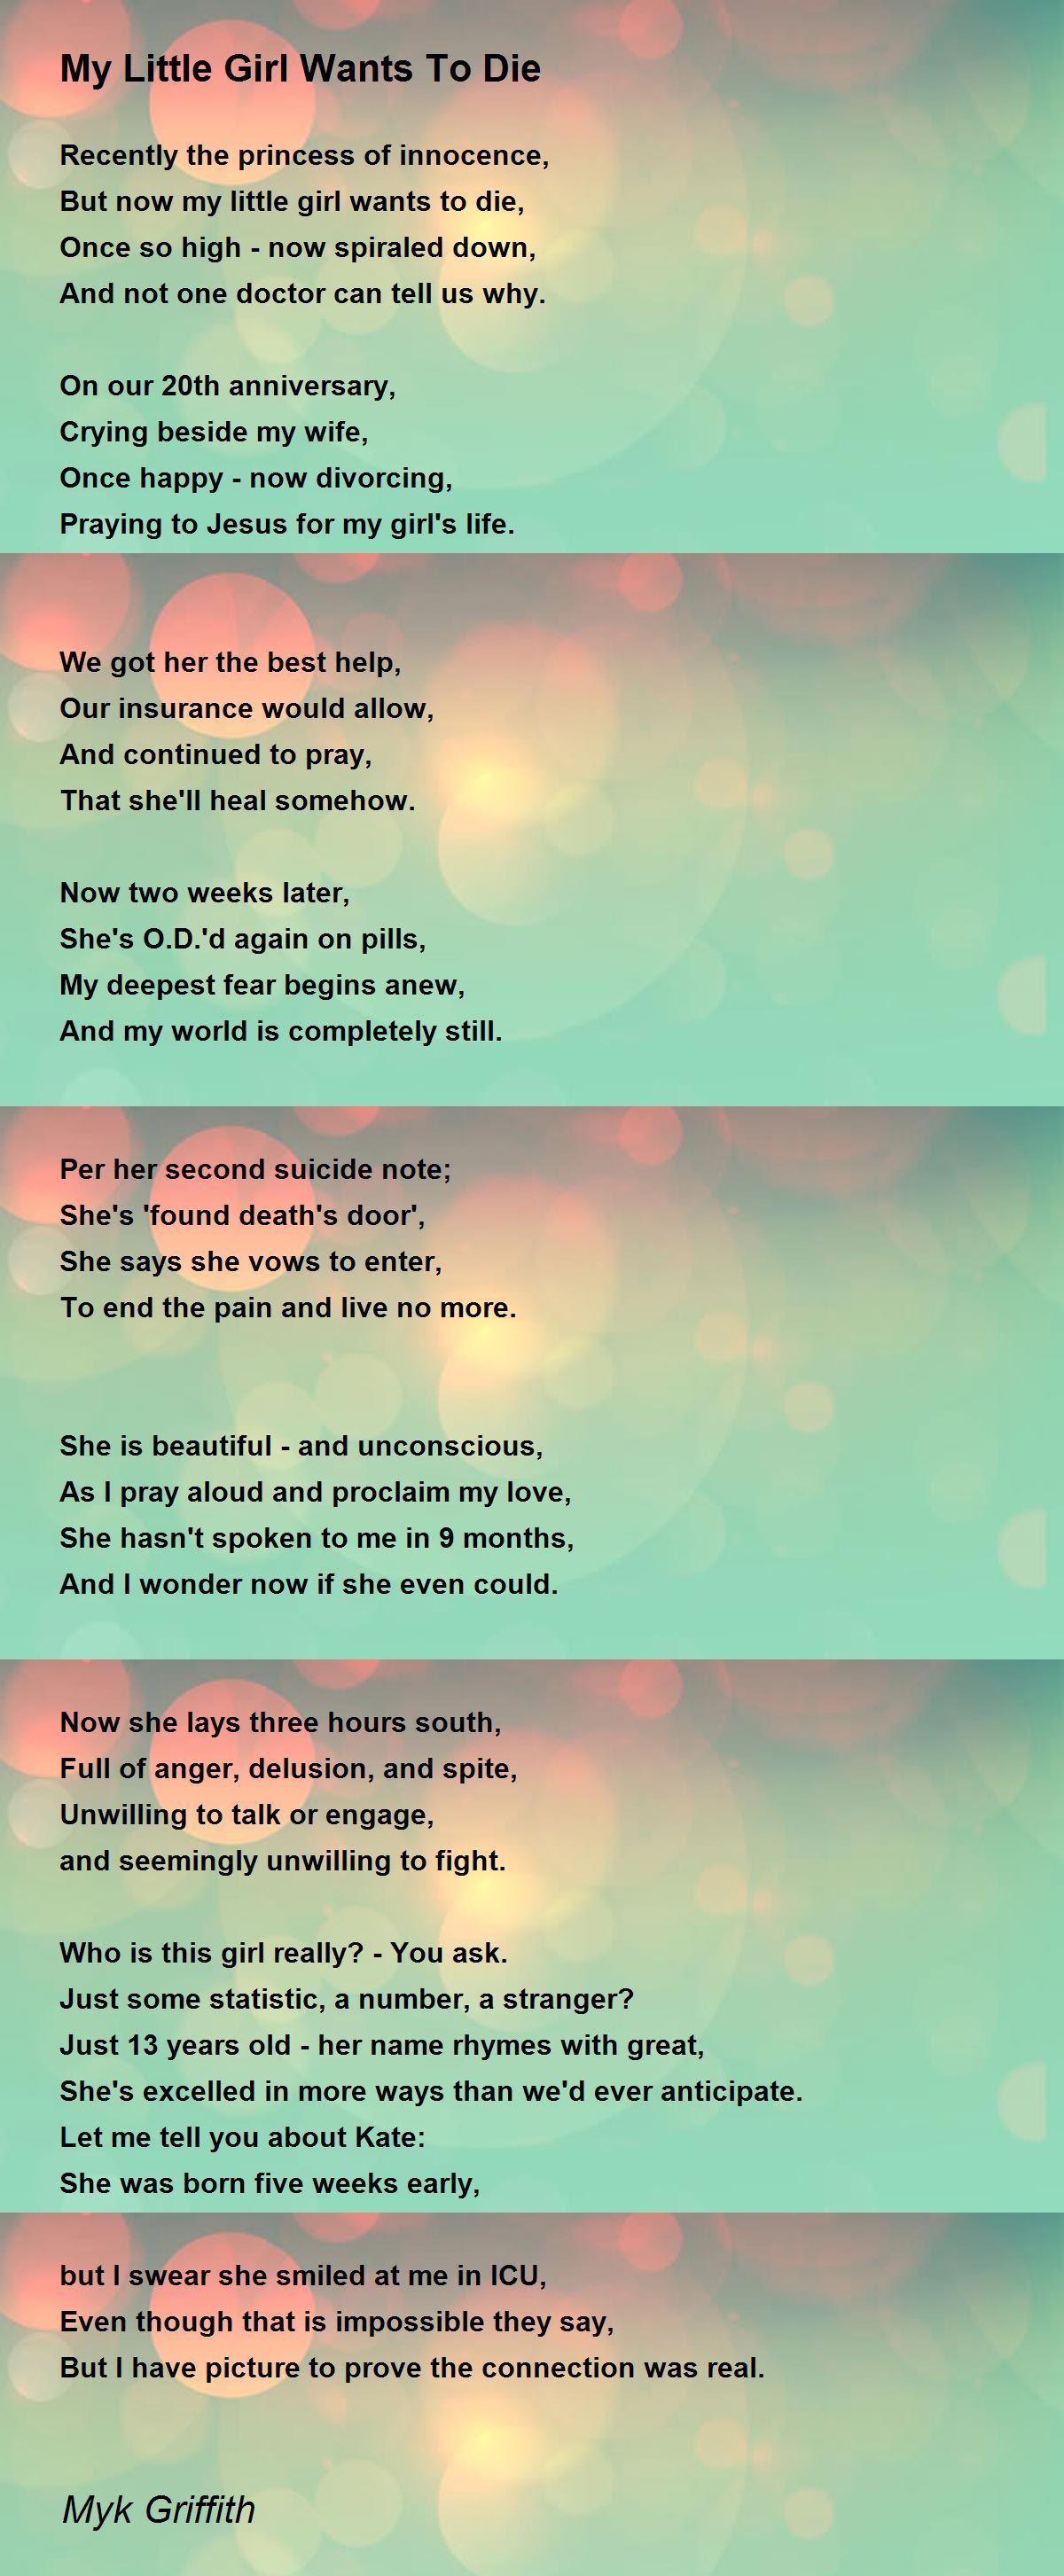 My Little Girl Wants To Die Poem by Myk Griffith - Poem Hunter